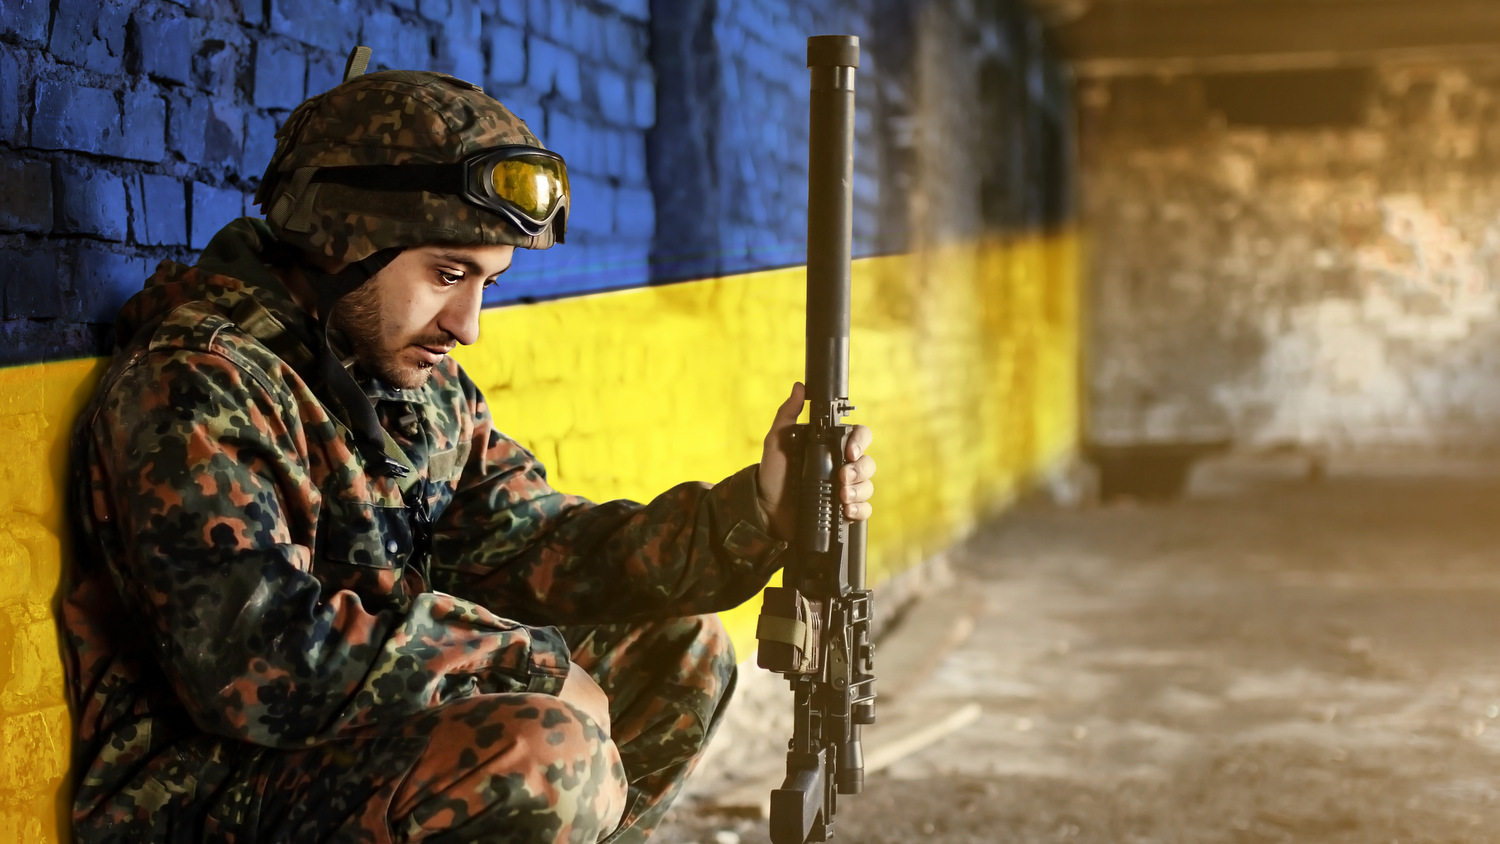 Military soldier on the background of the flag of Ukraine. The flag of Ukraine is painted on a brick wall, a tired sad soldier sits with a weapon in his hands. Relations between Ukraine and Russia